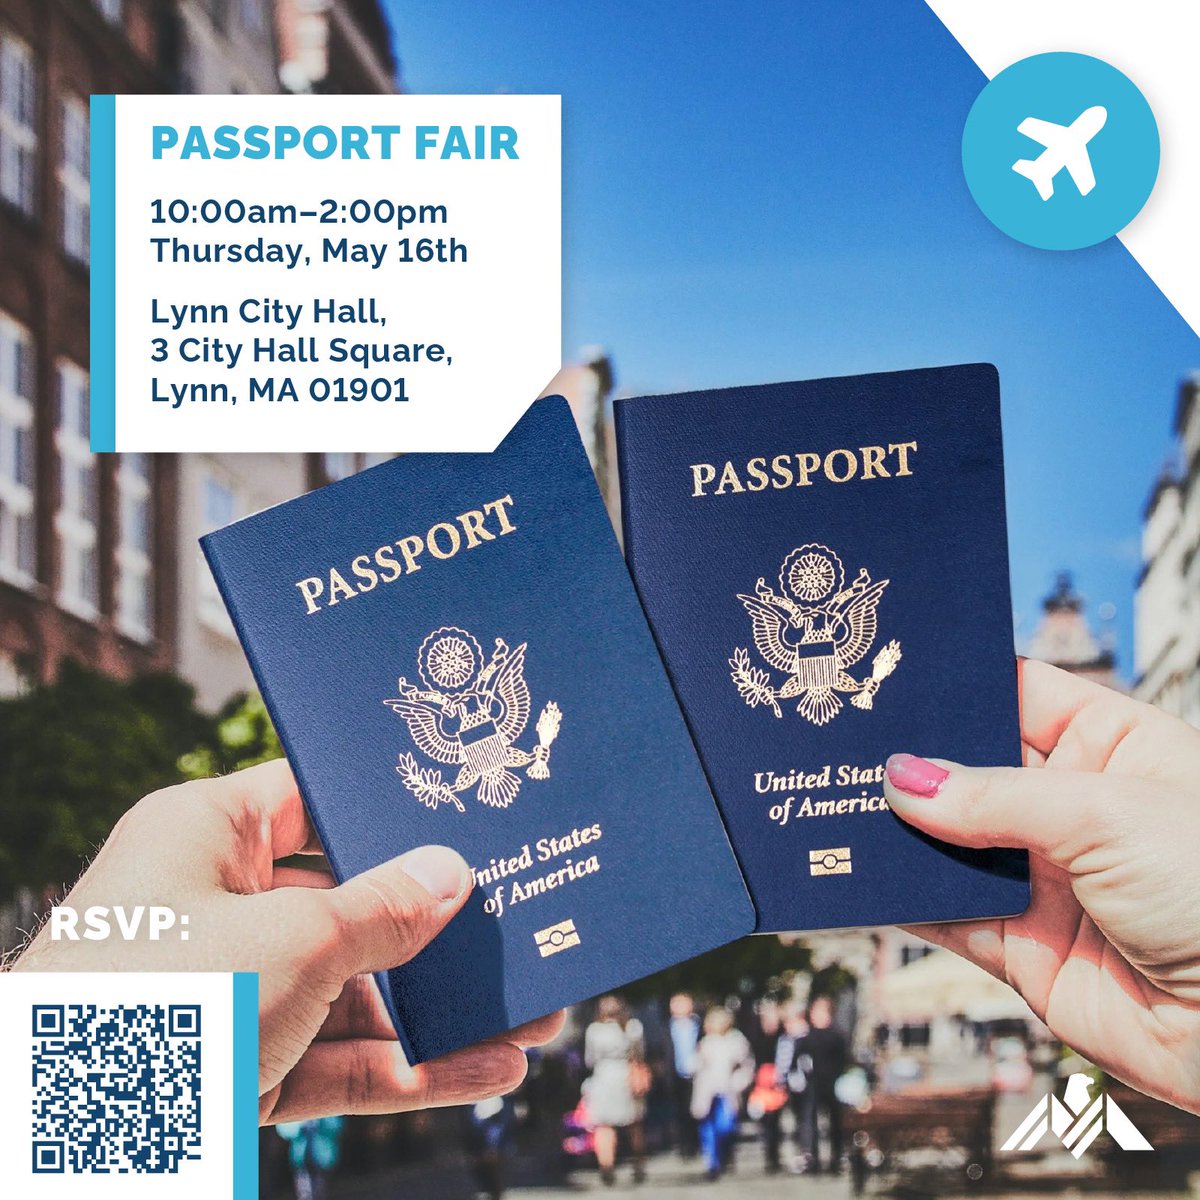 Don’t let an expiring passport ruin your plans. On May 16th, my office is holding a Passport Fair to help you get or renew a passport hassle-free. Space is limited, so RSVPs are required. Check out what to bring and sign up for a slot here: ✈️🌎 bit.ly/PassportFair20…